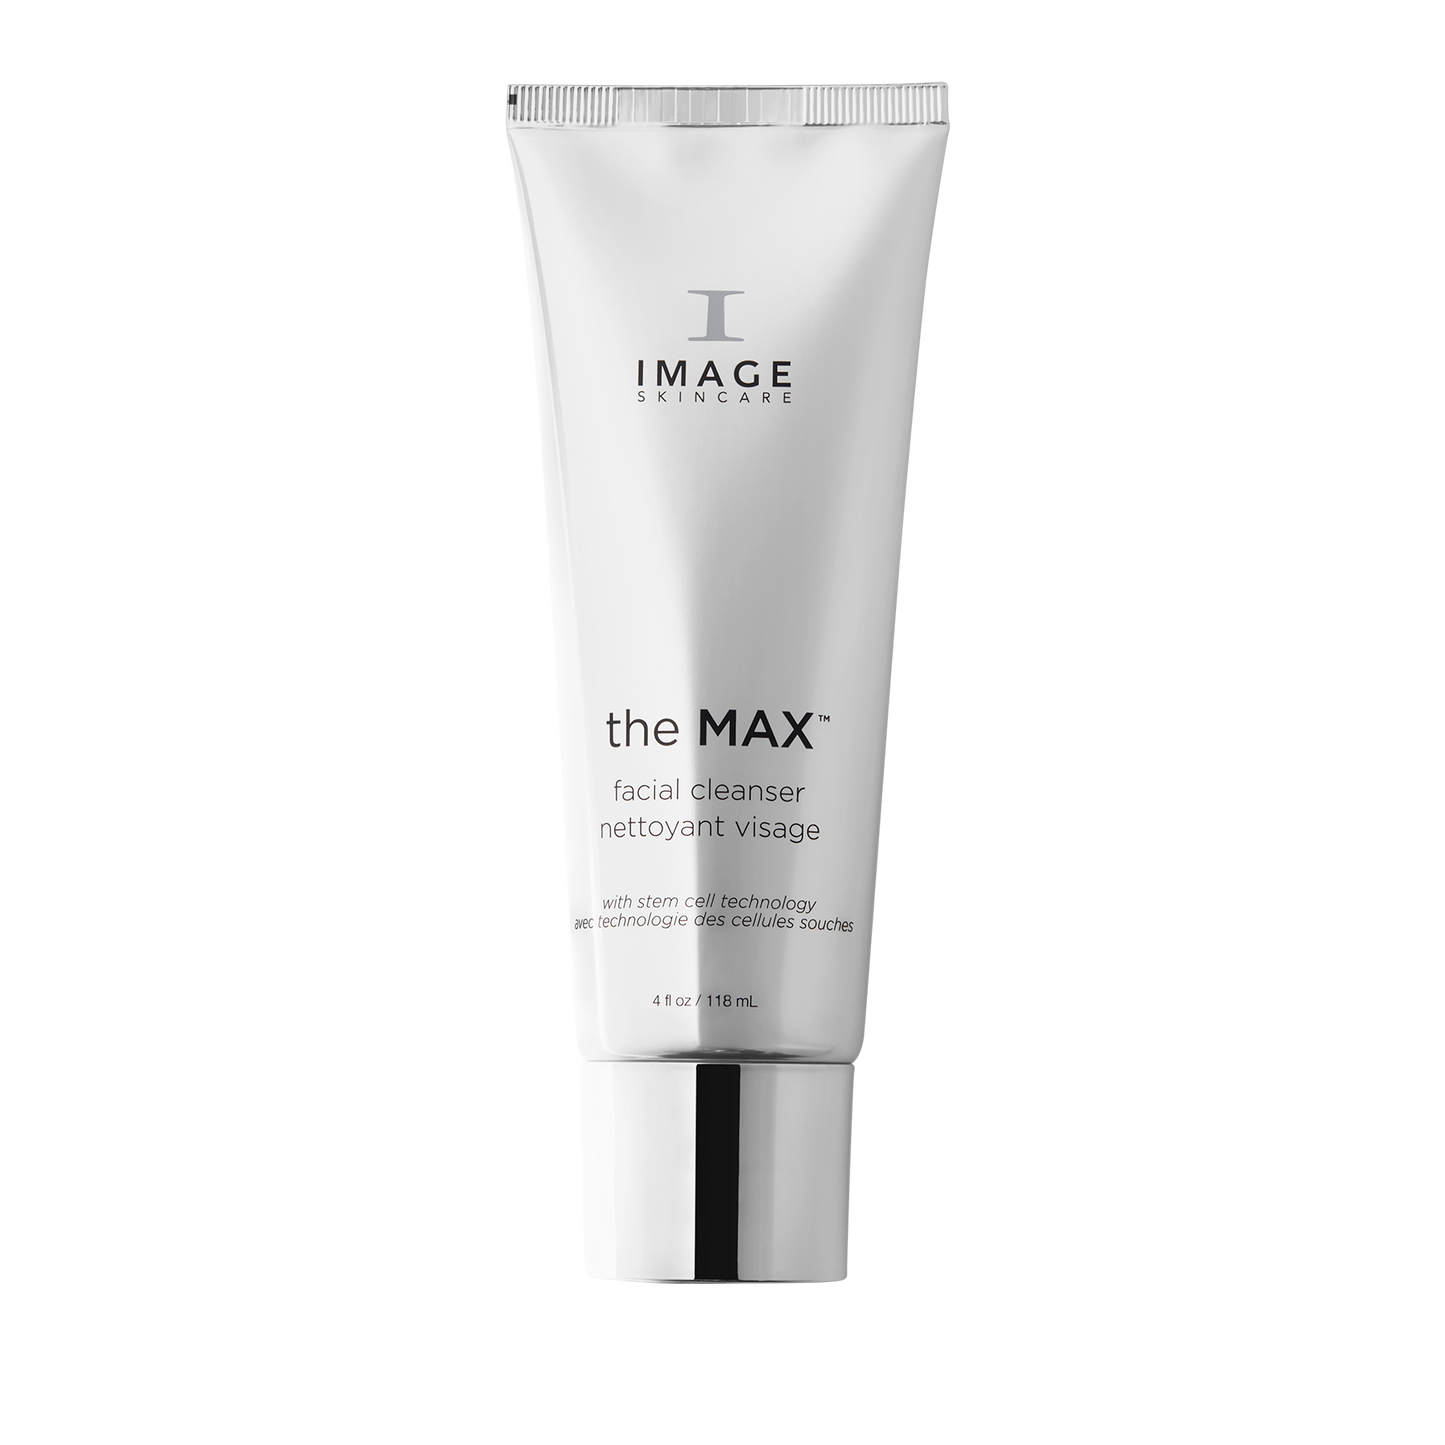 Image Skincare The Max Facial Cleanser 118 ml